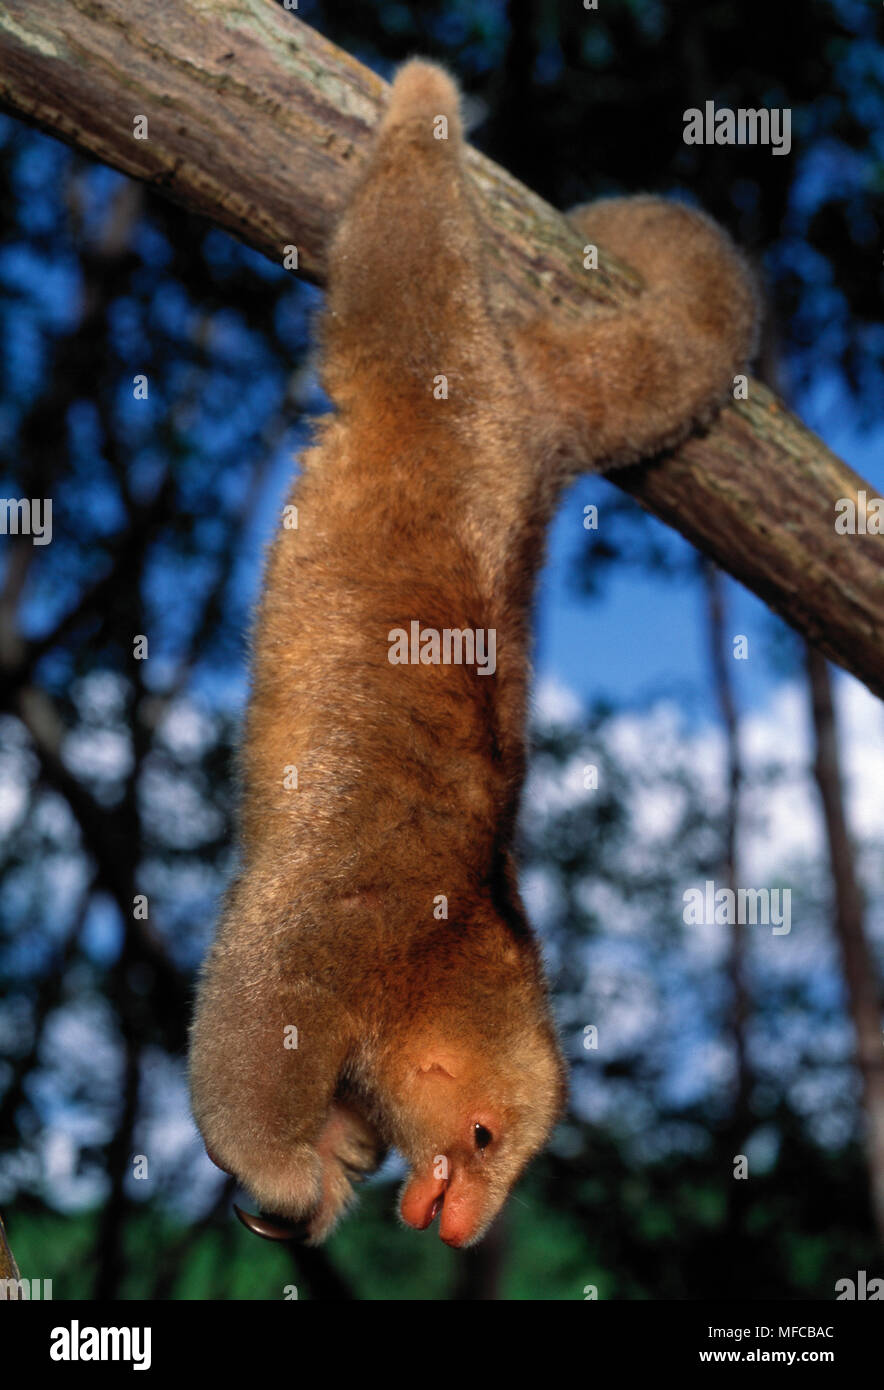 TWO-TOED or PYGMY ANTEATER Cyclopes didactylus hanging from branch, Caroni Swamp, Trinidad, West Indies. Stock Photo